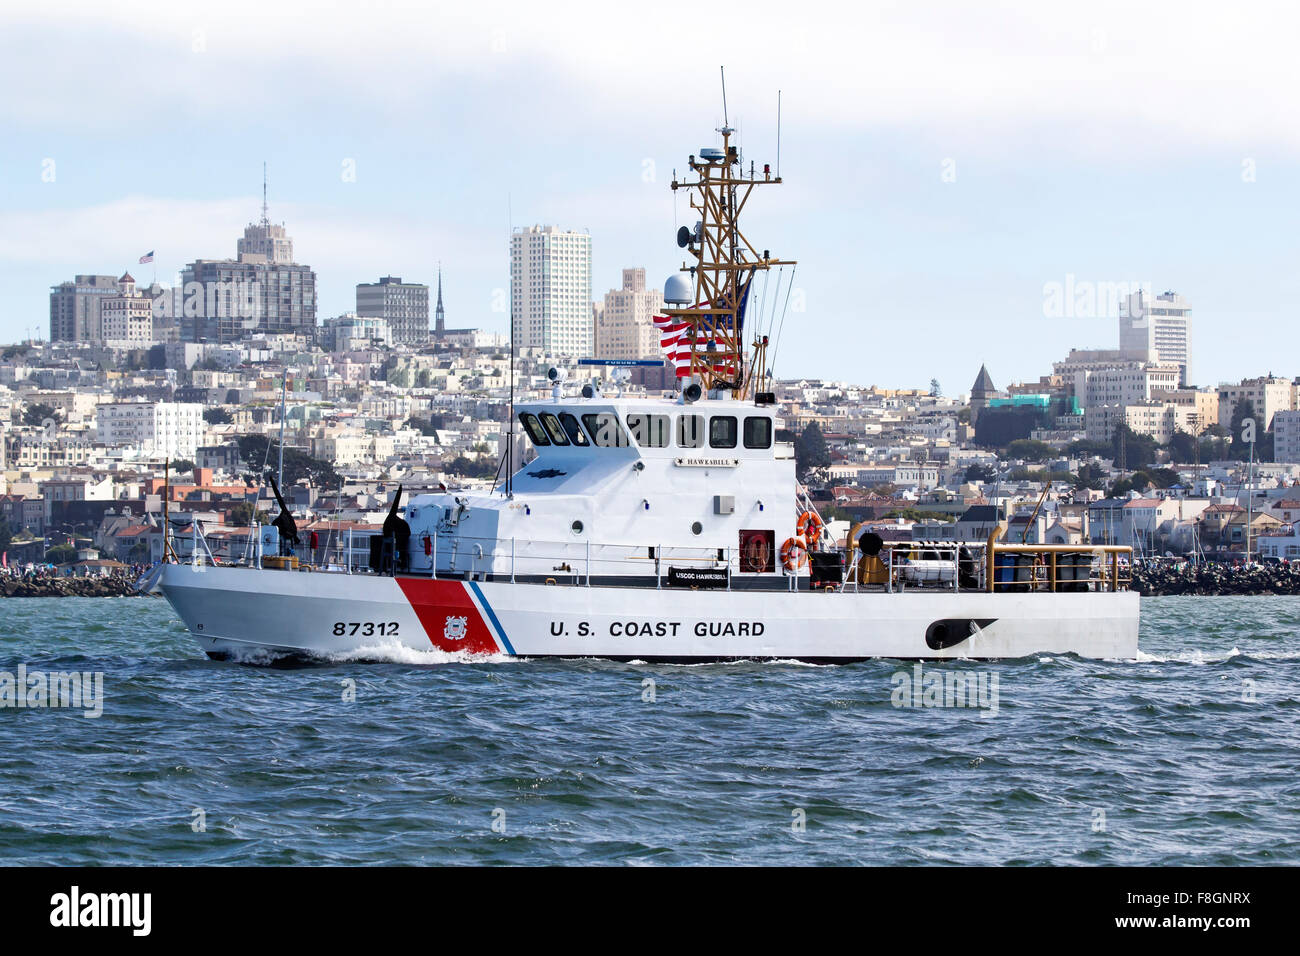 USCGC Hawksbill (WPB-87312) patrols the San Francisco waterfront. The Hawksbill is an 87ft Marine Protector Class Patrol Boat. Stock Photo